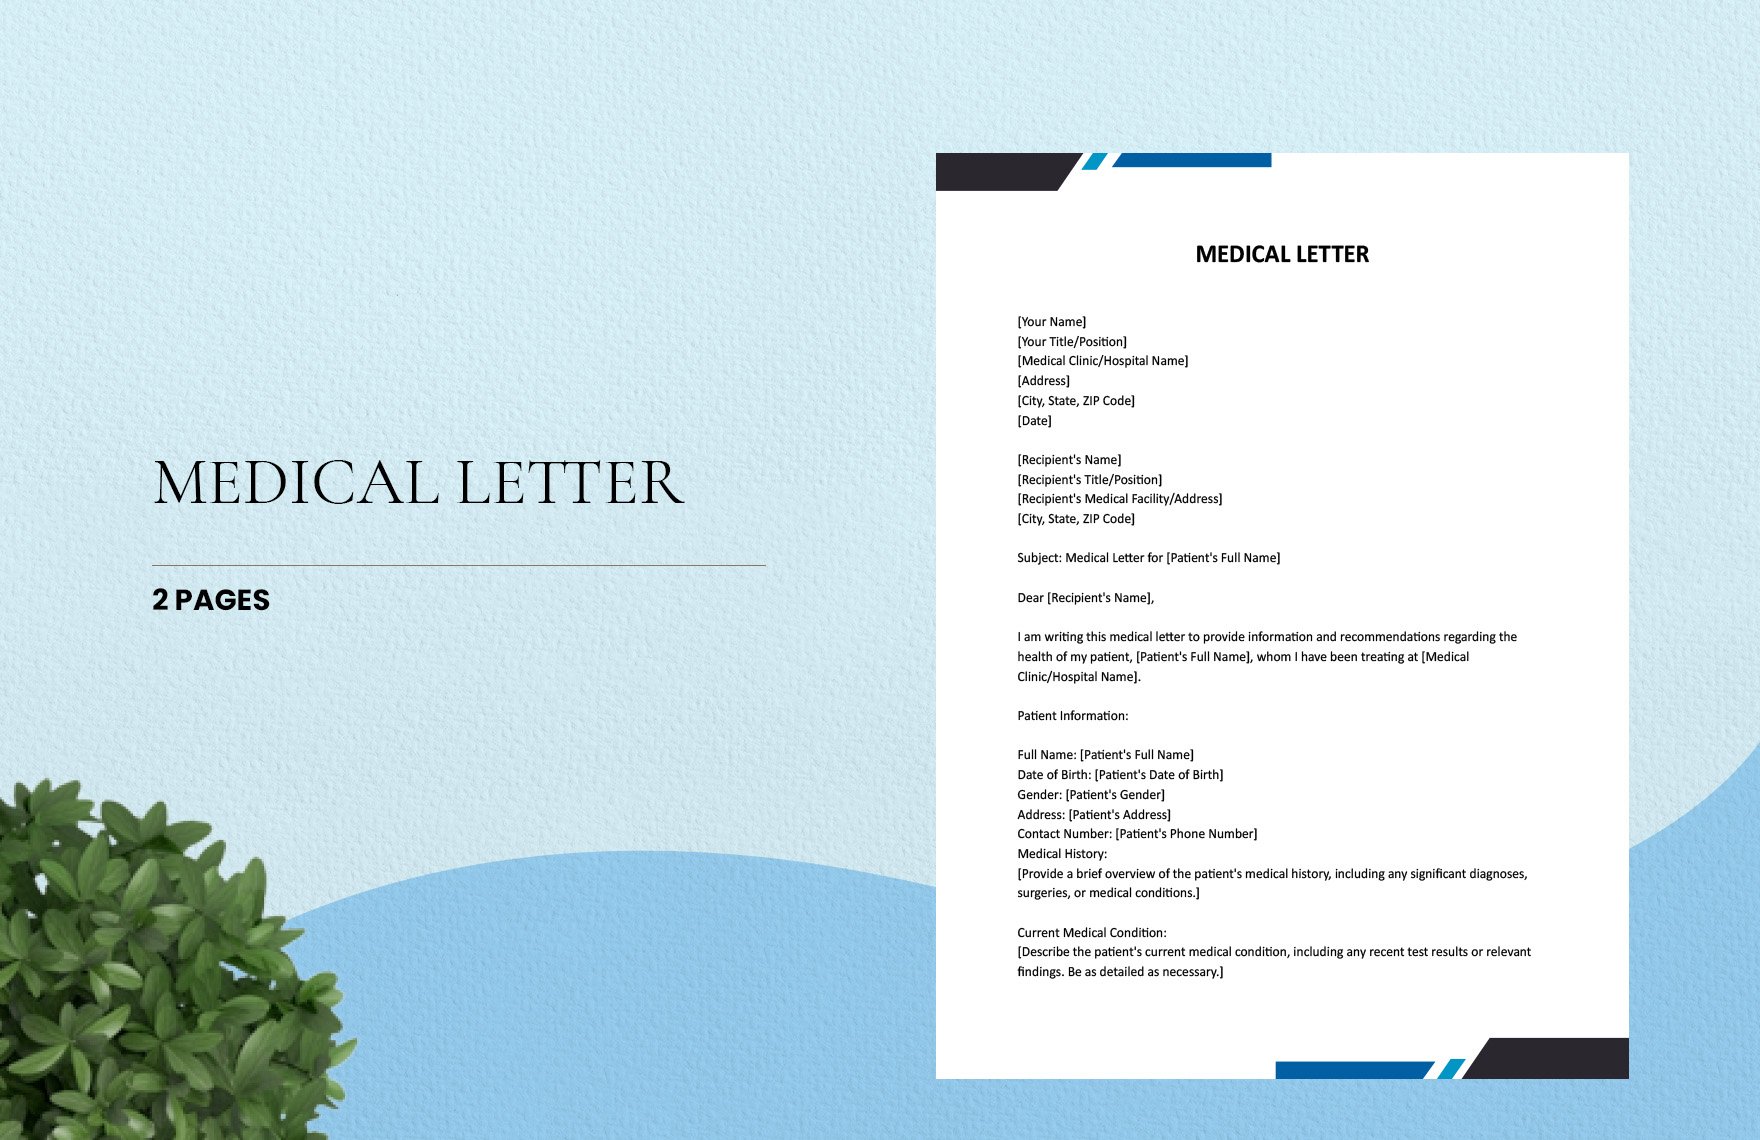 Medical Letter in Word, Google Docs, Apple Pages